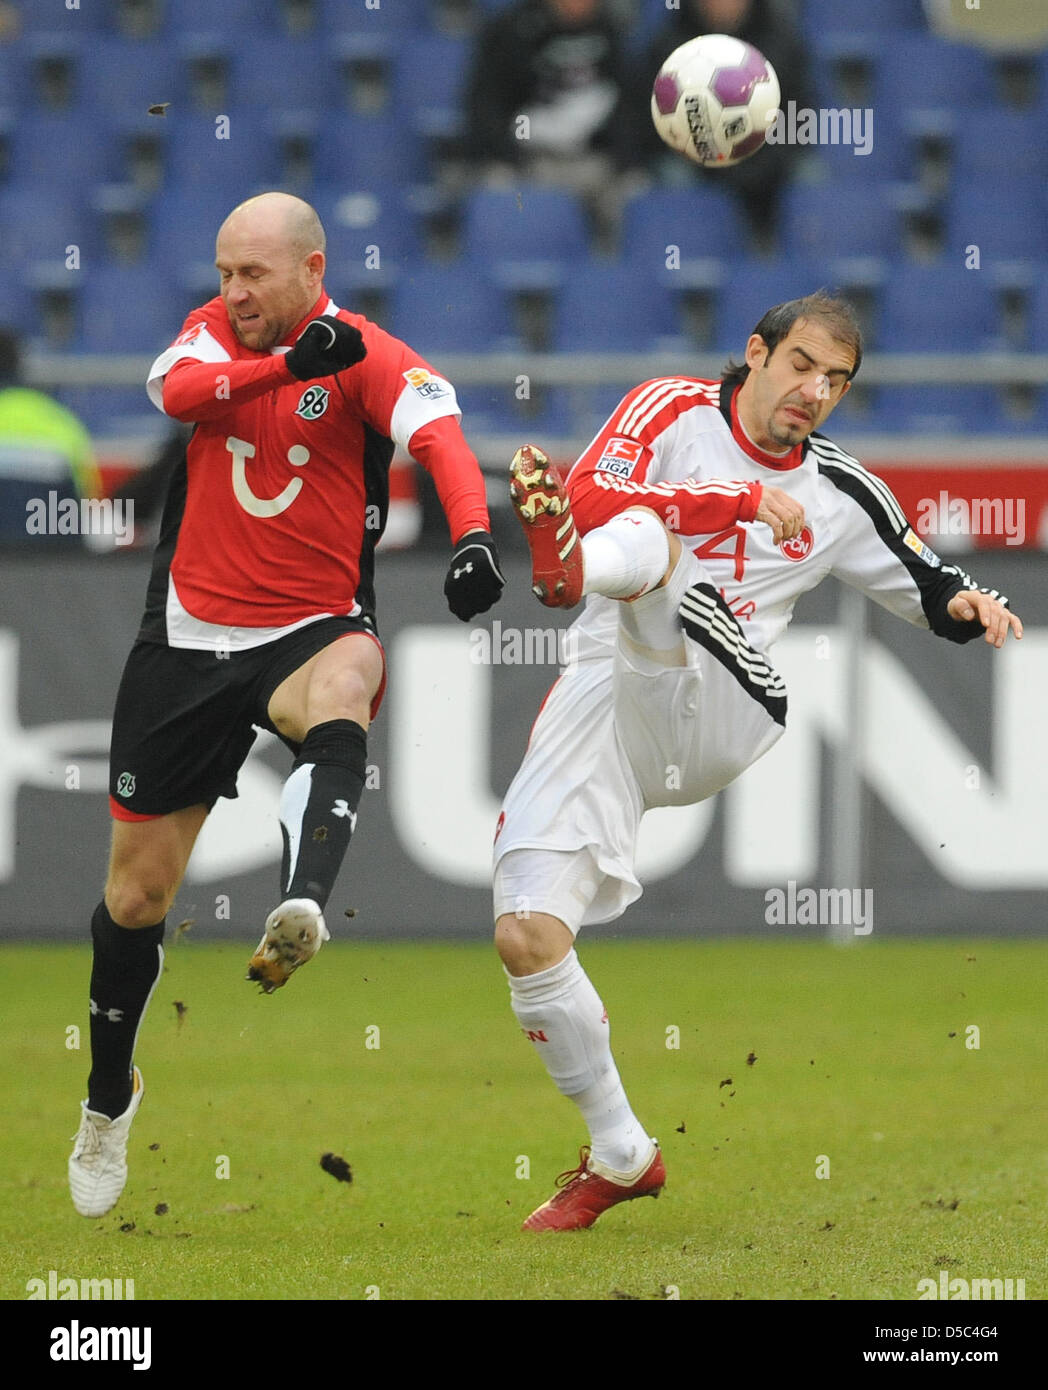 Hanover's Jiri Stajner (L) fights for the ball with Nuremberg's Javier Pinola during the German Bundesliga match Hanover 96 vs 1. FC Nuremberg at AWD-Arena stadium in Hanover, Germany, 30 January 2010. Nuremberg defeated Hanover 3-1. Photo: PETER STEFFEN (ATTENTION: EMBARGO CONDITIONS! The DFL permits the further utilisation of the pictures in IPTV, mobile services and other new te Stock Photo